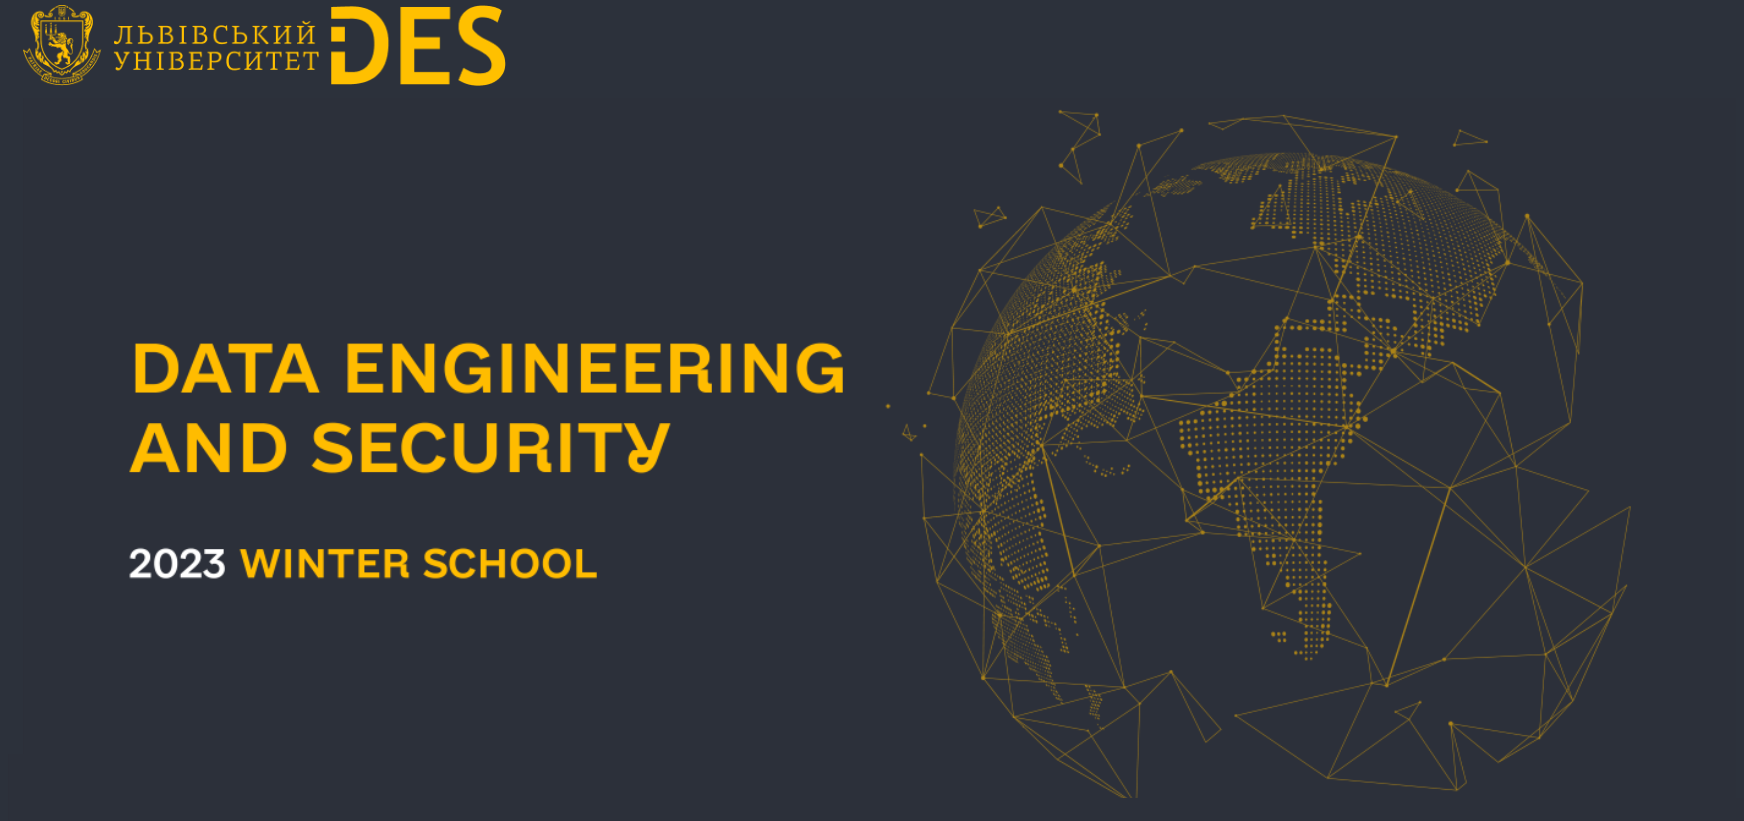 Data Engineering and Security 2023